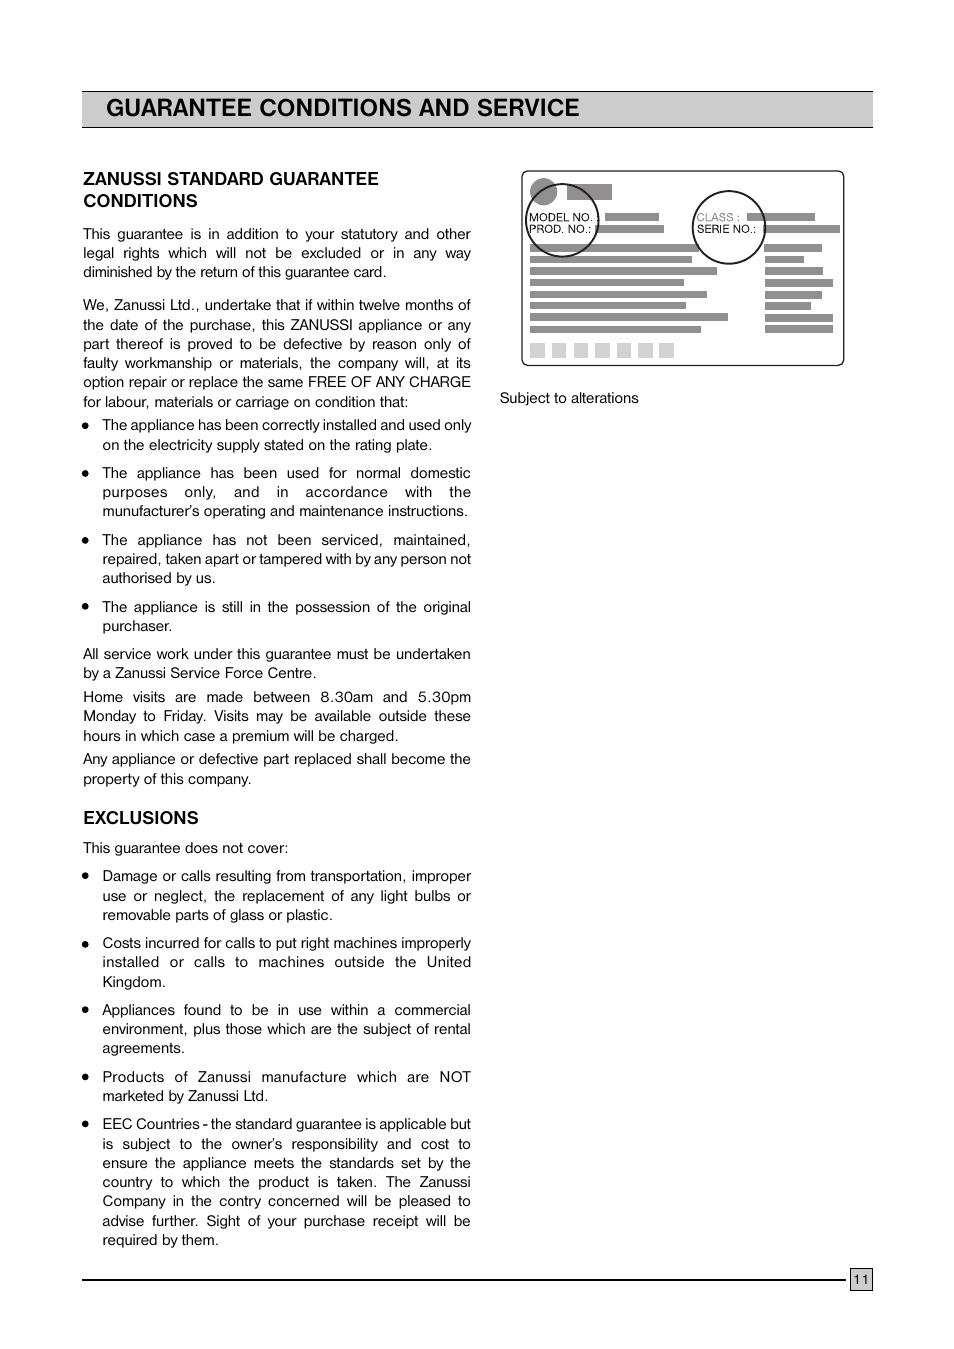 Guarantee conditions and service | FRIGIDAIRE FCFH 183 BW User Manual | Page 11 / 11